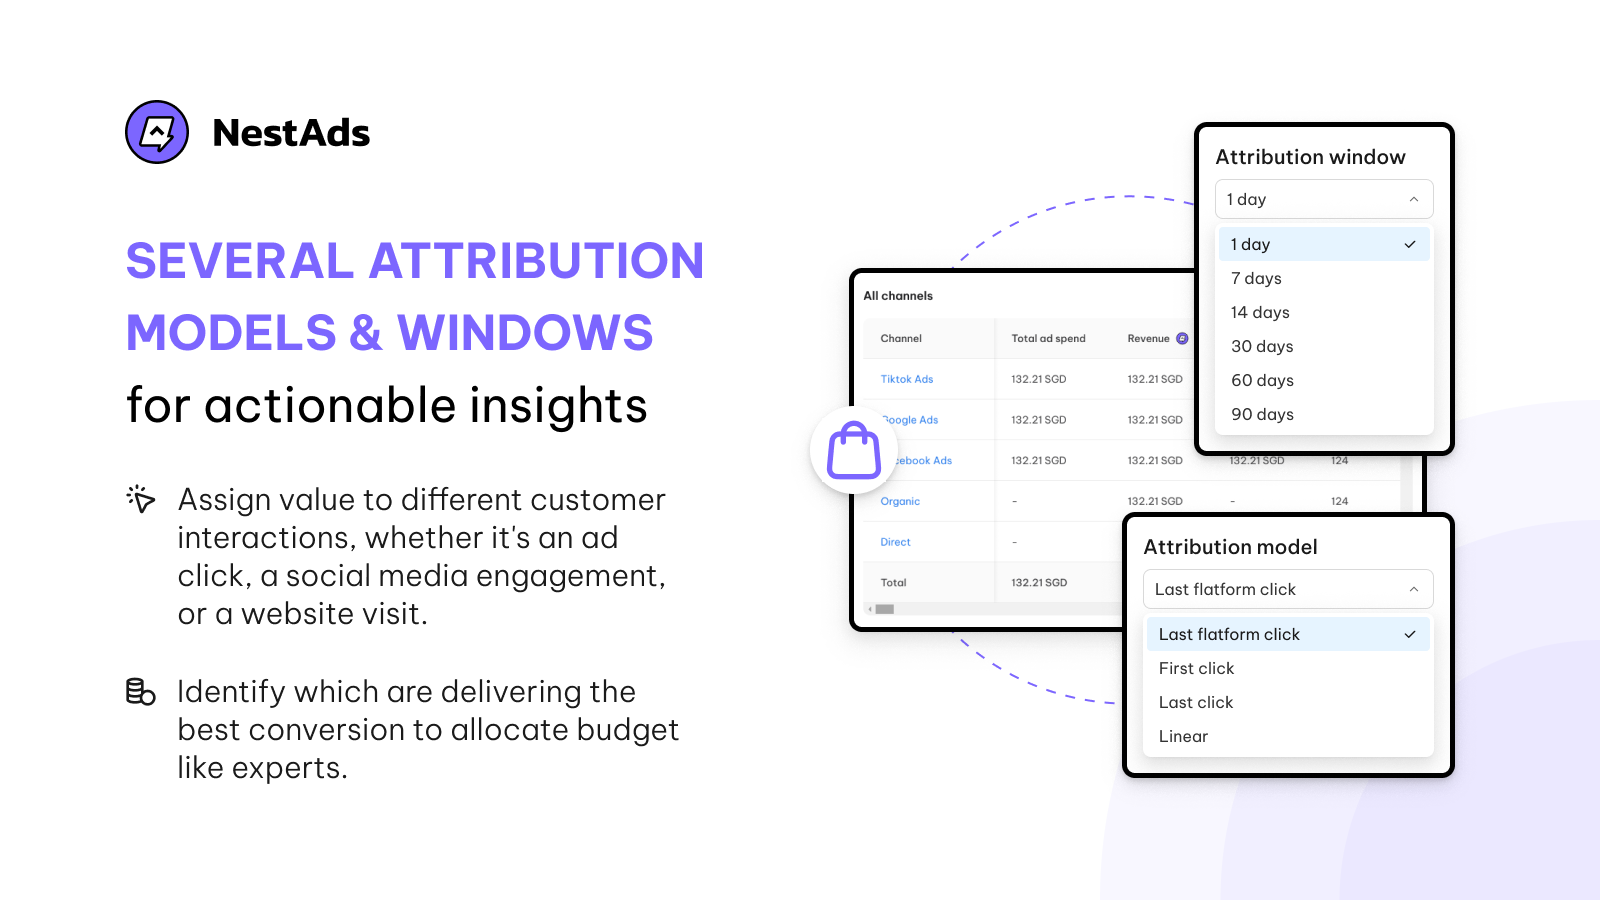 Several attribution models & windows for actionable insights